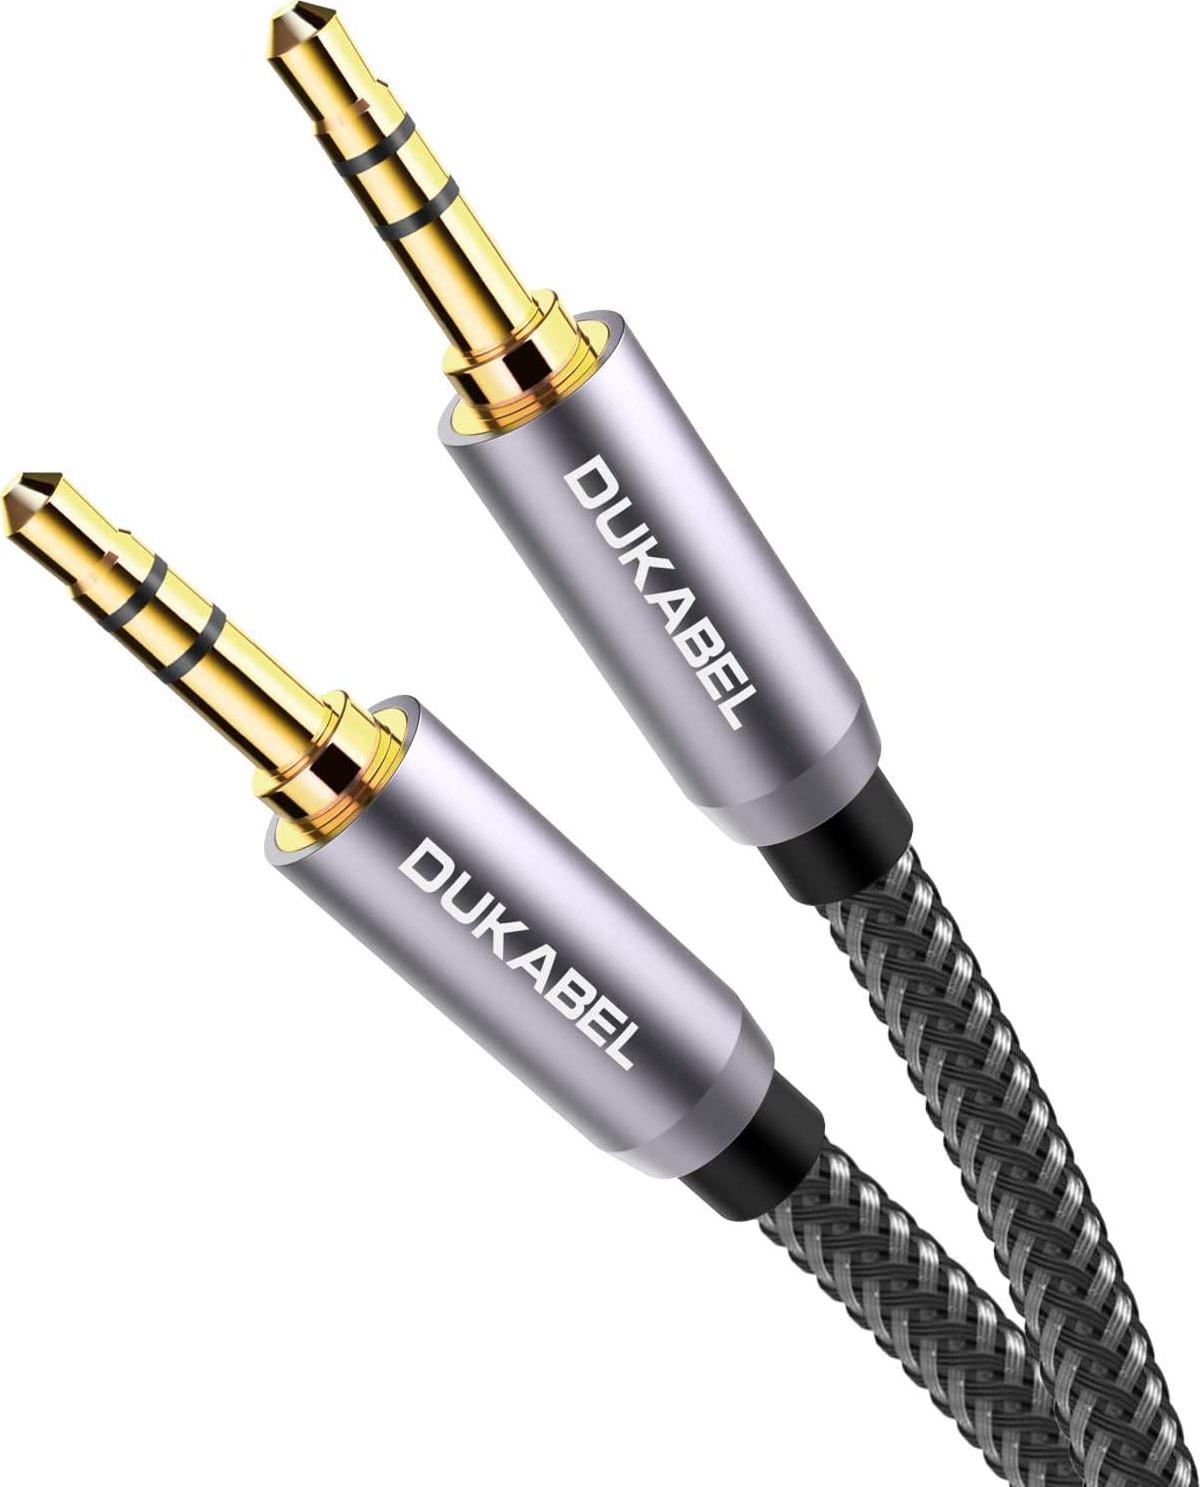 DuKabel, DuKabel Top Series 3.5mm AUX Cable Lossless Audio Gold-Plated Auxiliary Audio Cable Nylon Braided Male to Male Stereo Audio AUX Cord Car Headphones Phones Speakers Home Stereos 4 Feet / 1.2 Meters